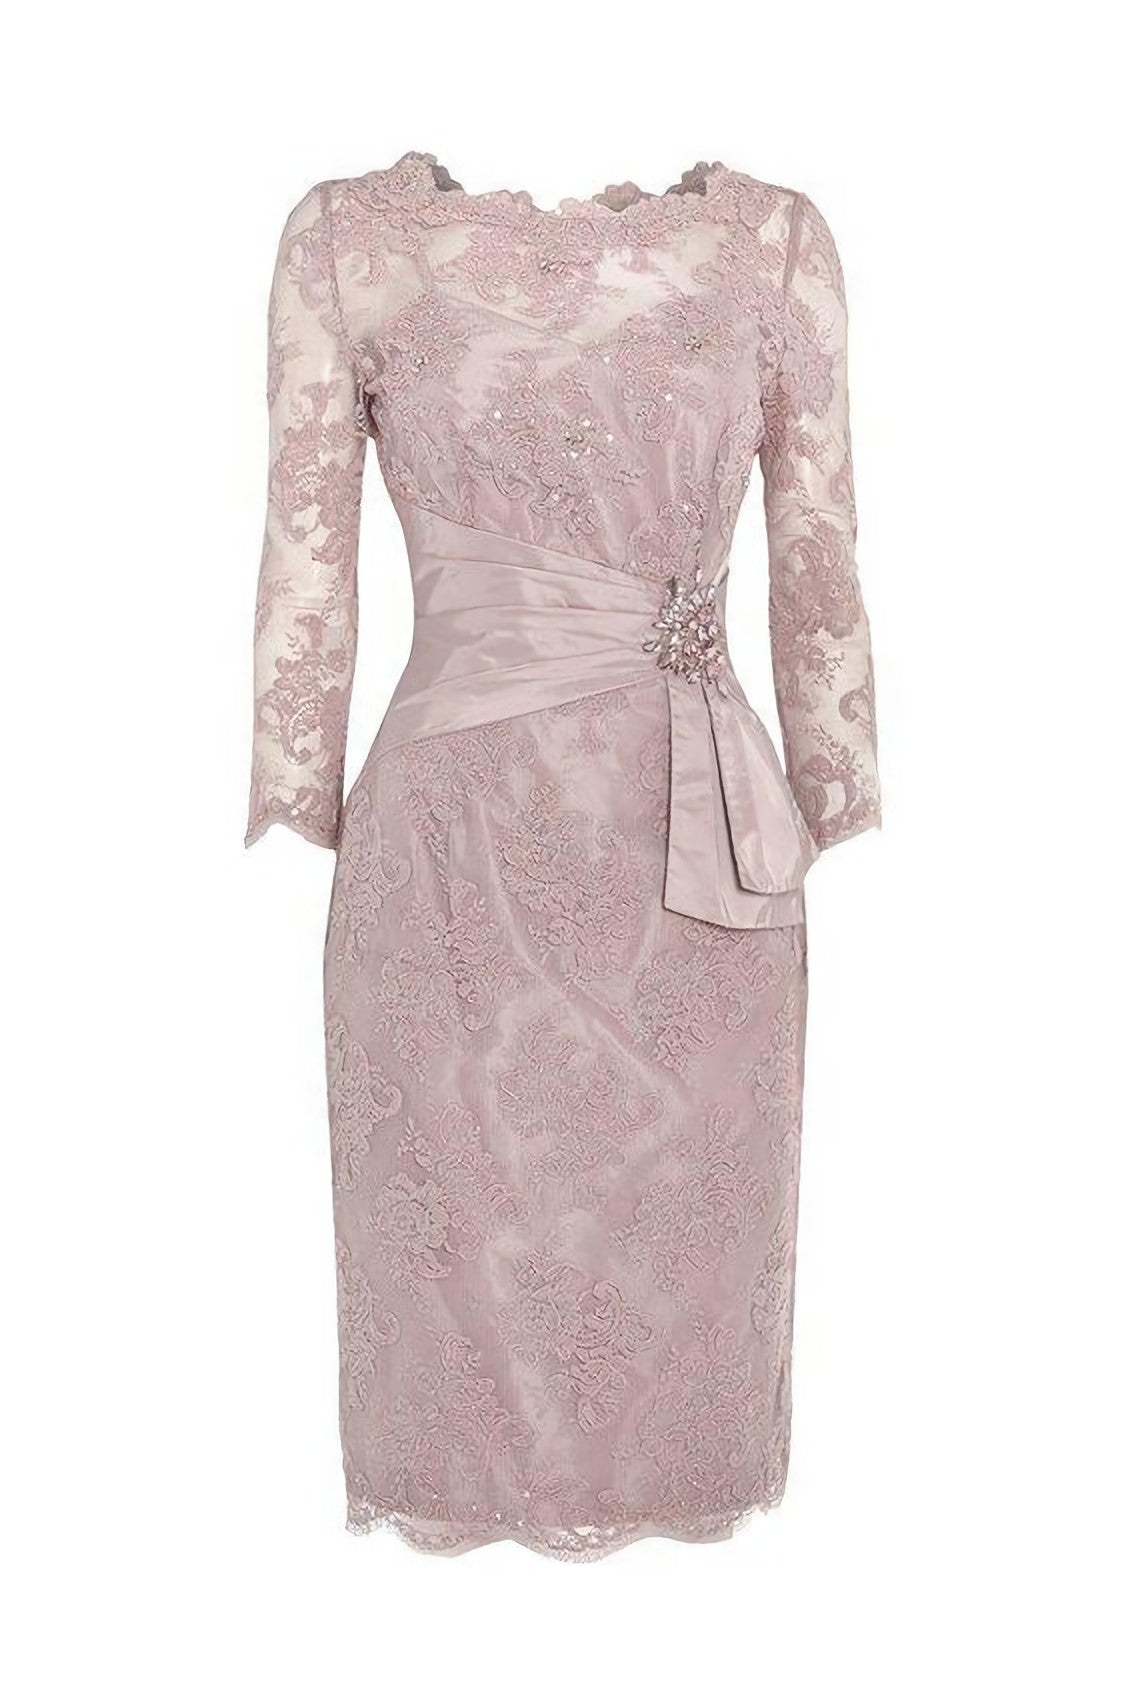 New Arrival Sheath Mothers Dresses, With Lace Blink Sequins Elegant Mother Of The Bride Dress, Long Sleeve Evening Gowns Prom Dress